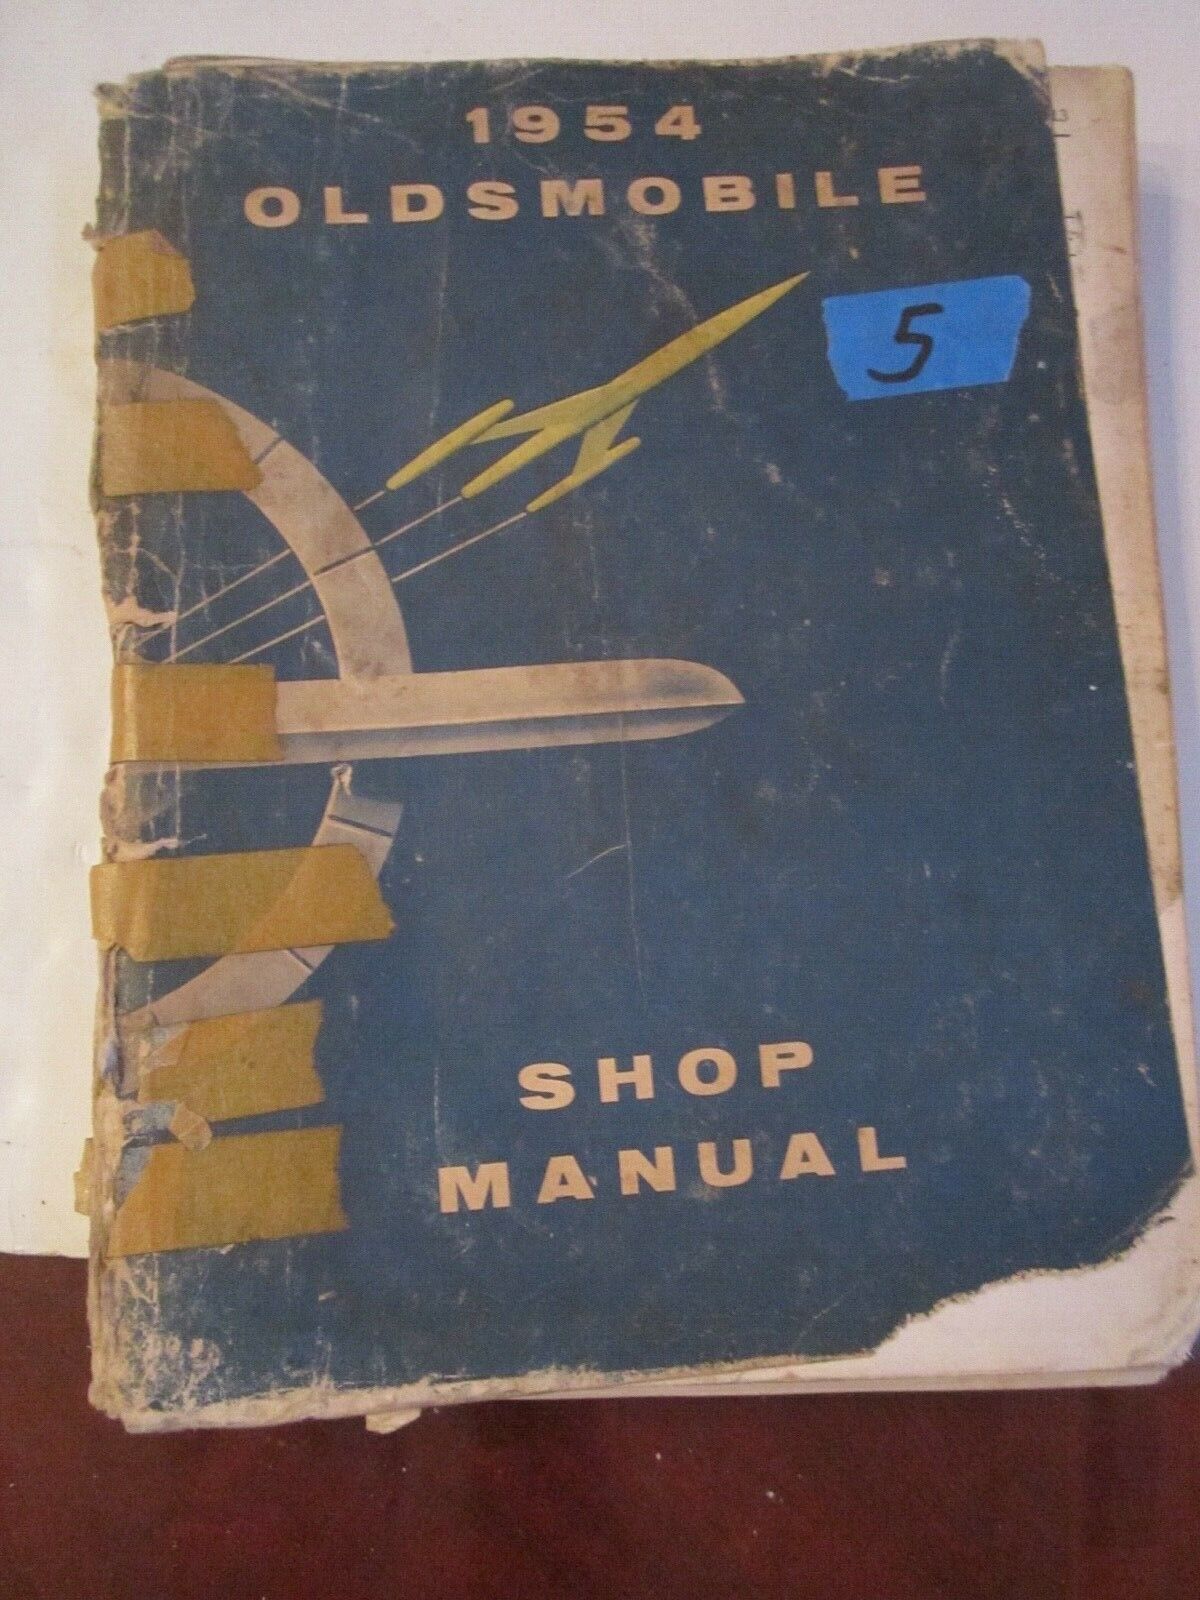 1954 OLDSMOBILE SHOP MANUAL AUTOMOBILE GUIDE - VERY THICK BOOKLET